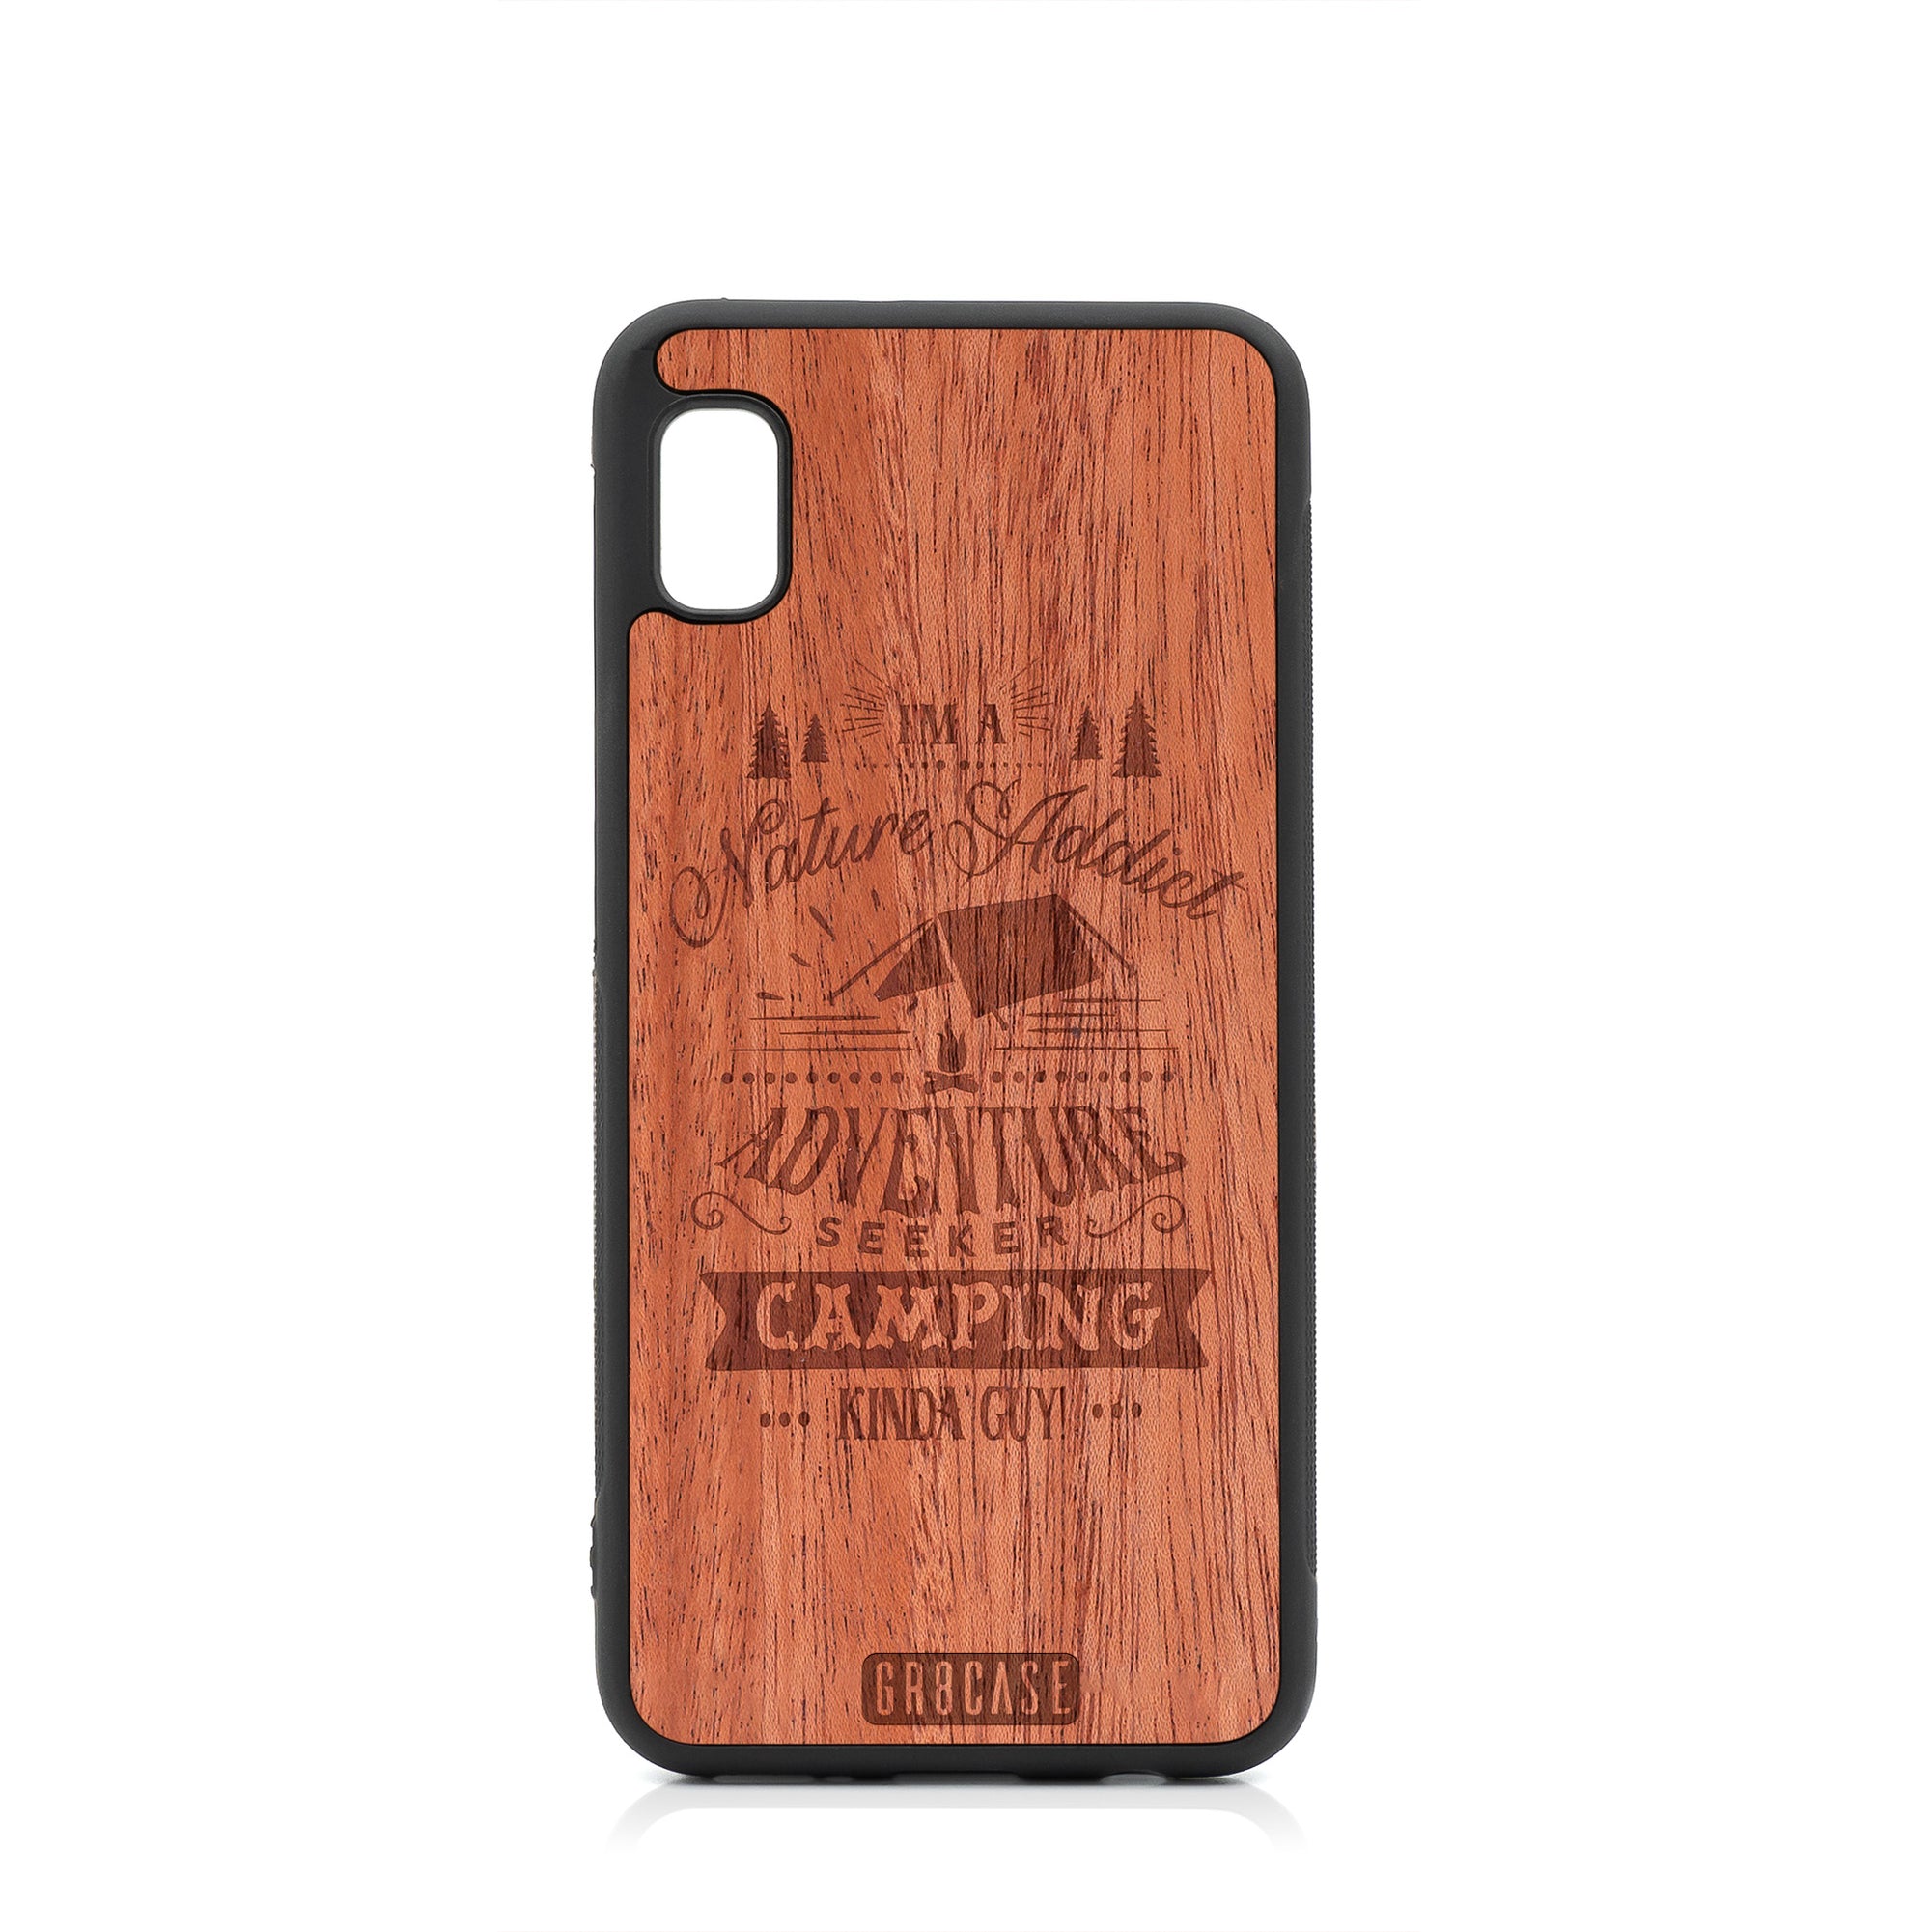 I'm A Nature Addict Adventure Seeker Camping Kinda Guy Design Wood Case For Samsung Galaxy A10E by GR8CASE